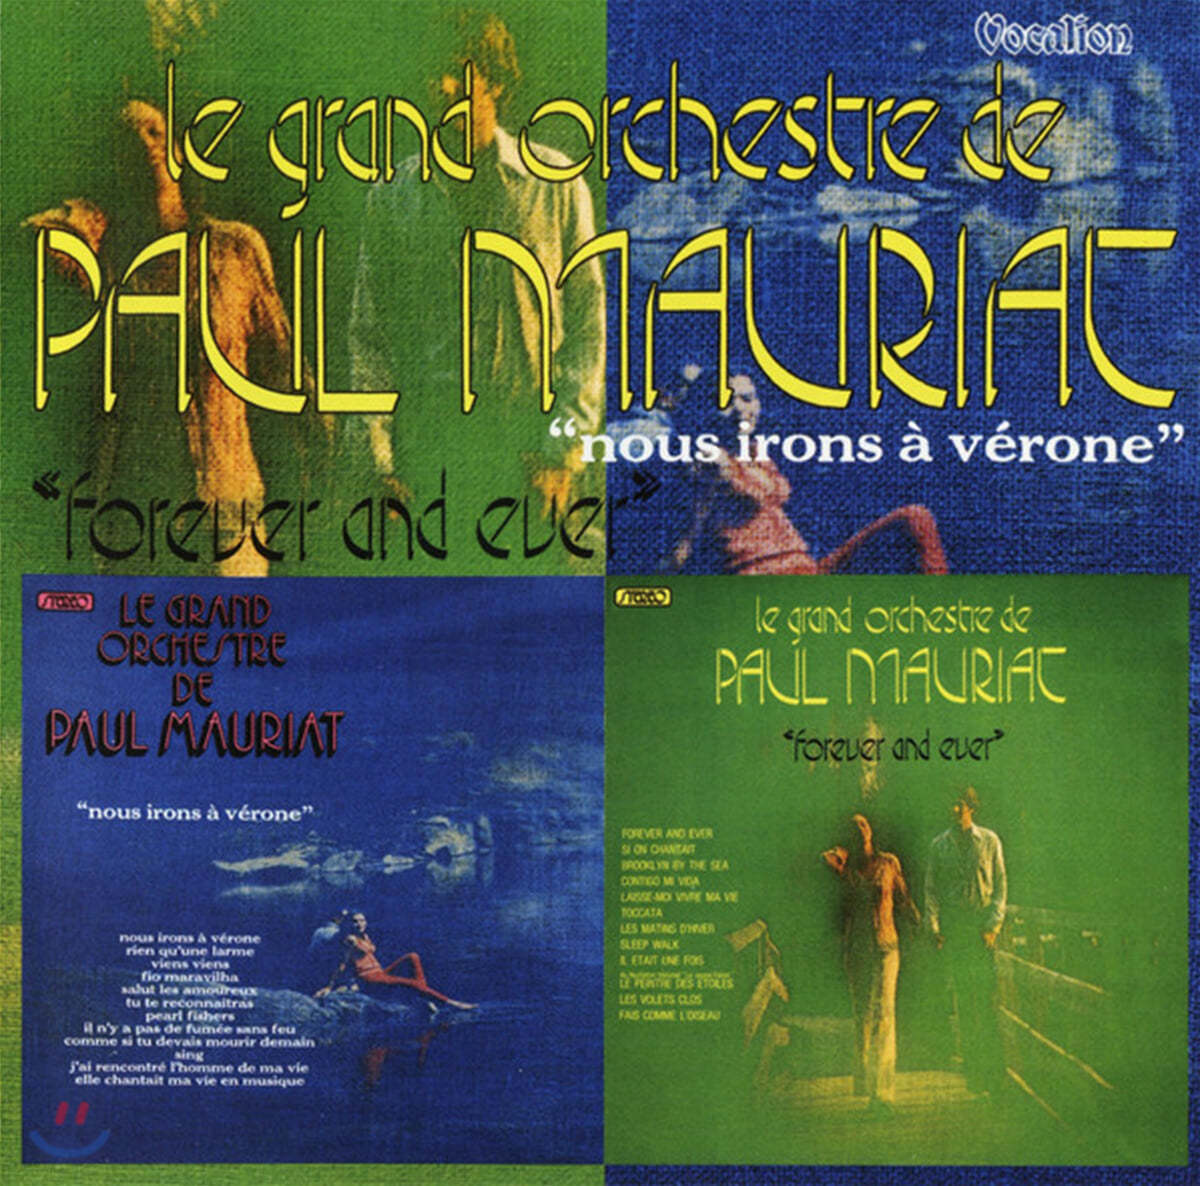 Paul Mauriat (폴 모리아) - Forever And Ever & Nous Irons Verone